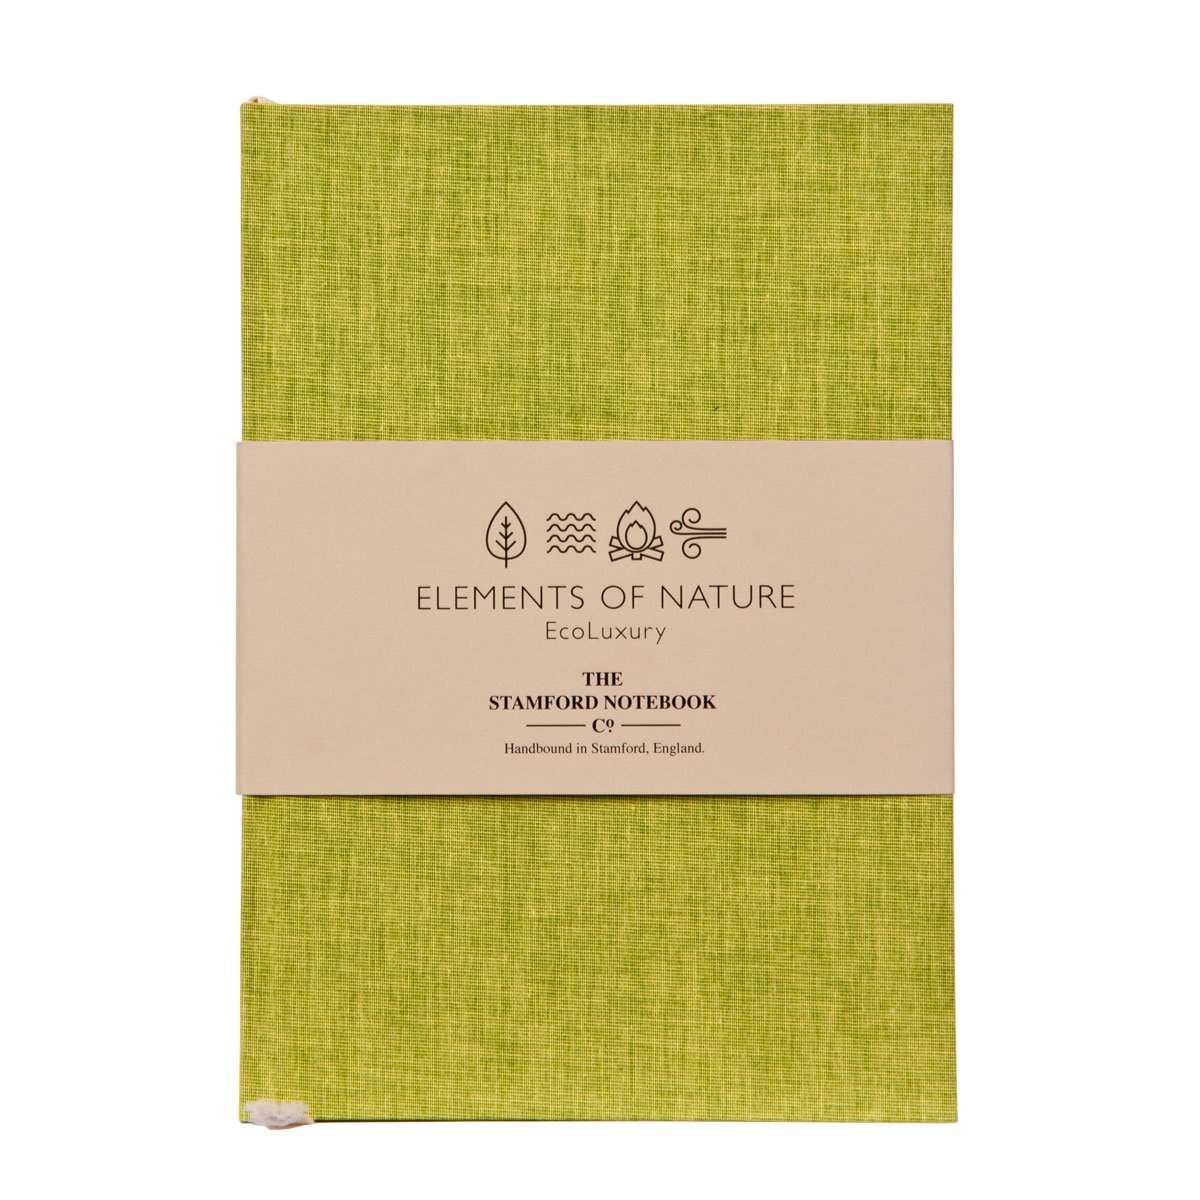 The Elements of Nature Notebooks